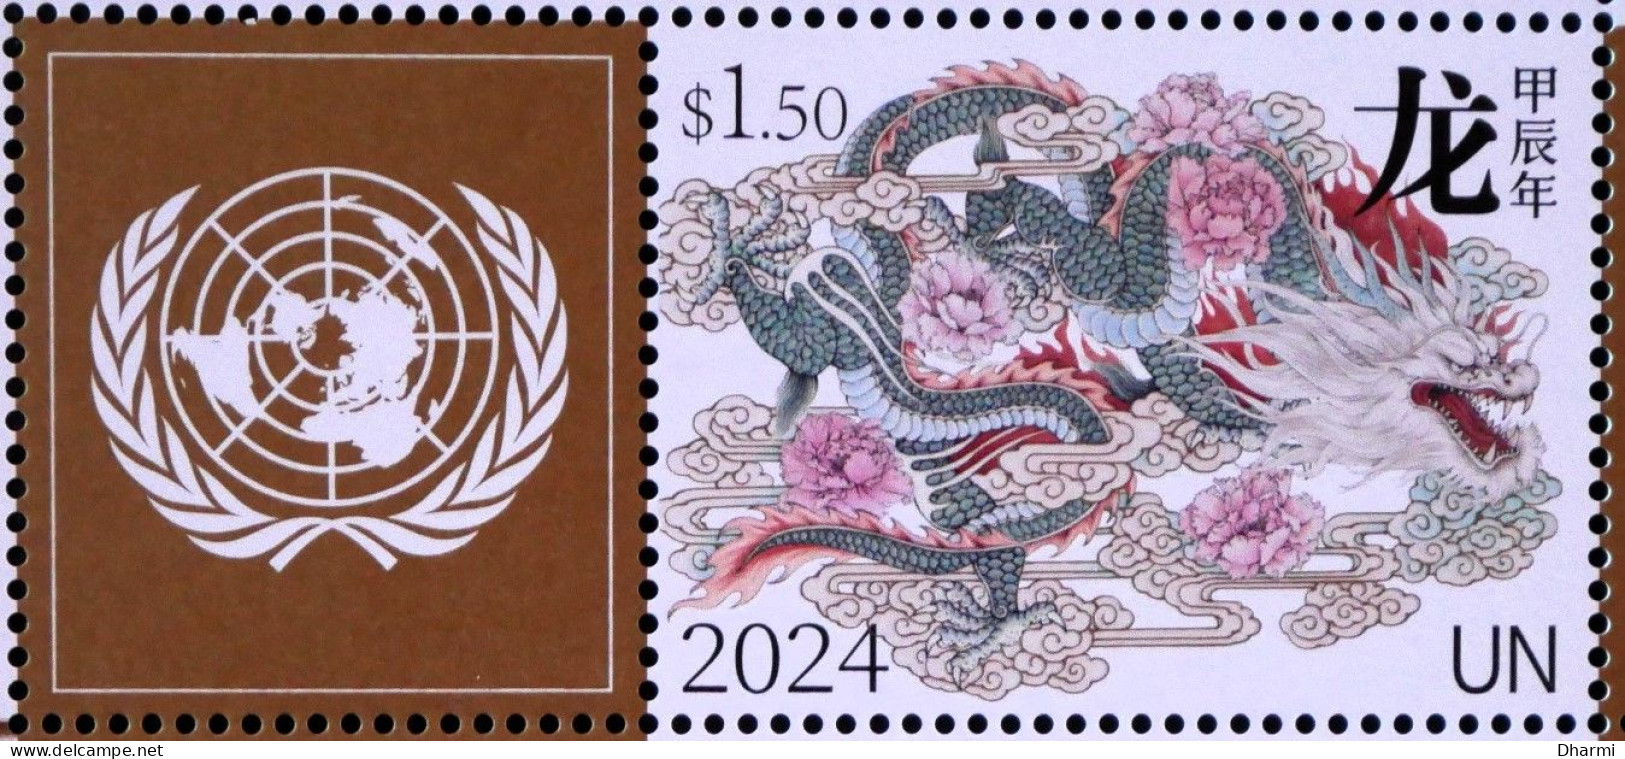 ONU - UNITED NATIONS 2024 - NATIONS UNIES - NEUF** 1TD - LUNAR YEAR OF THE DRAGON - ANNEE LUNAIRE DU DRAGON - MNH - Unused Stamps